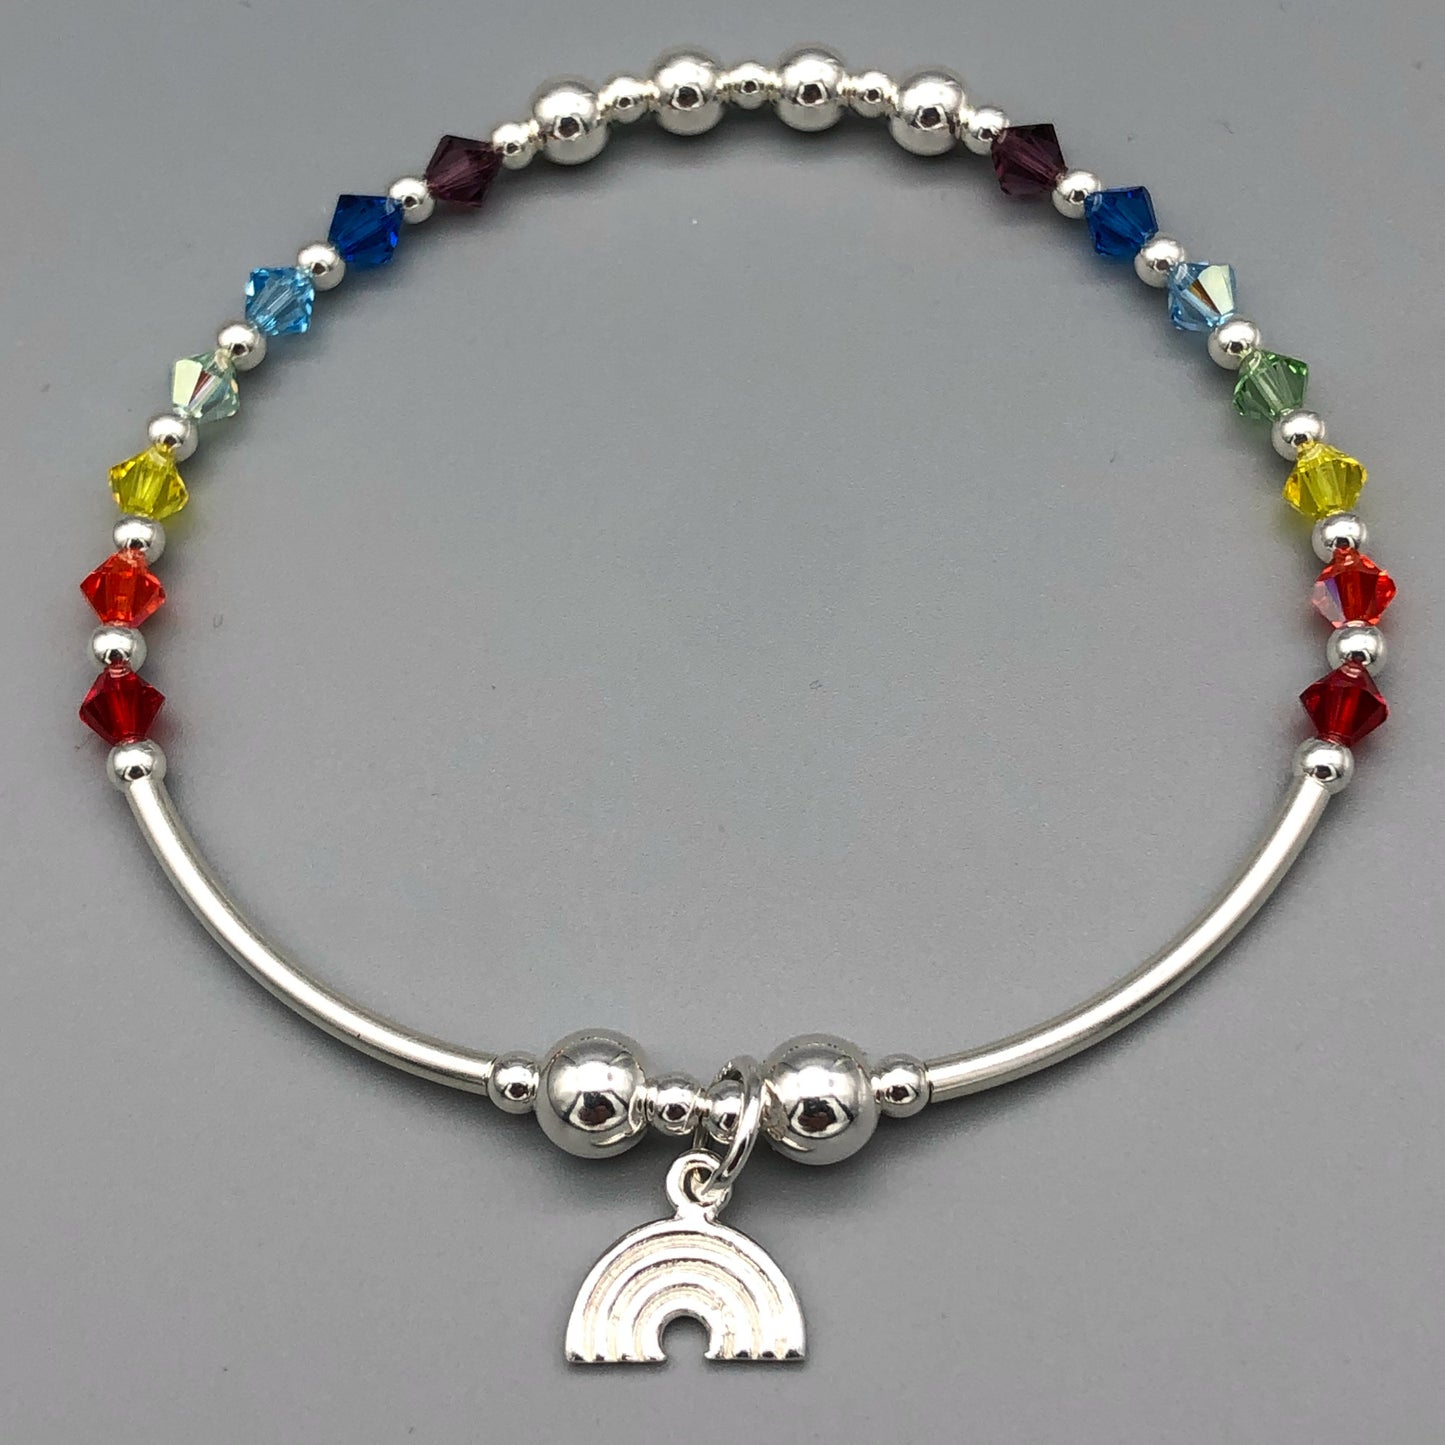 Rainbow Women's Sterling Silver Stacking Charm Bracelet by My Silver Wish